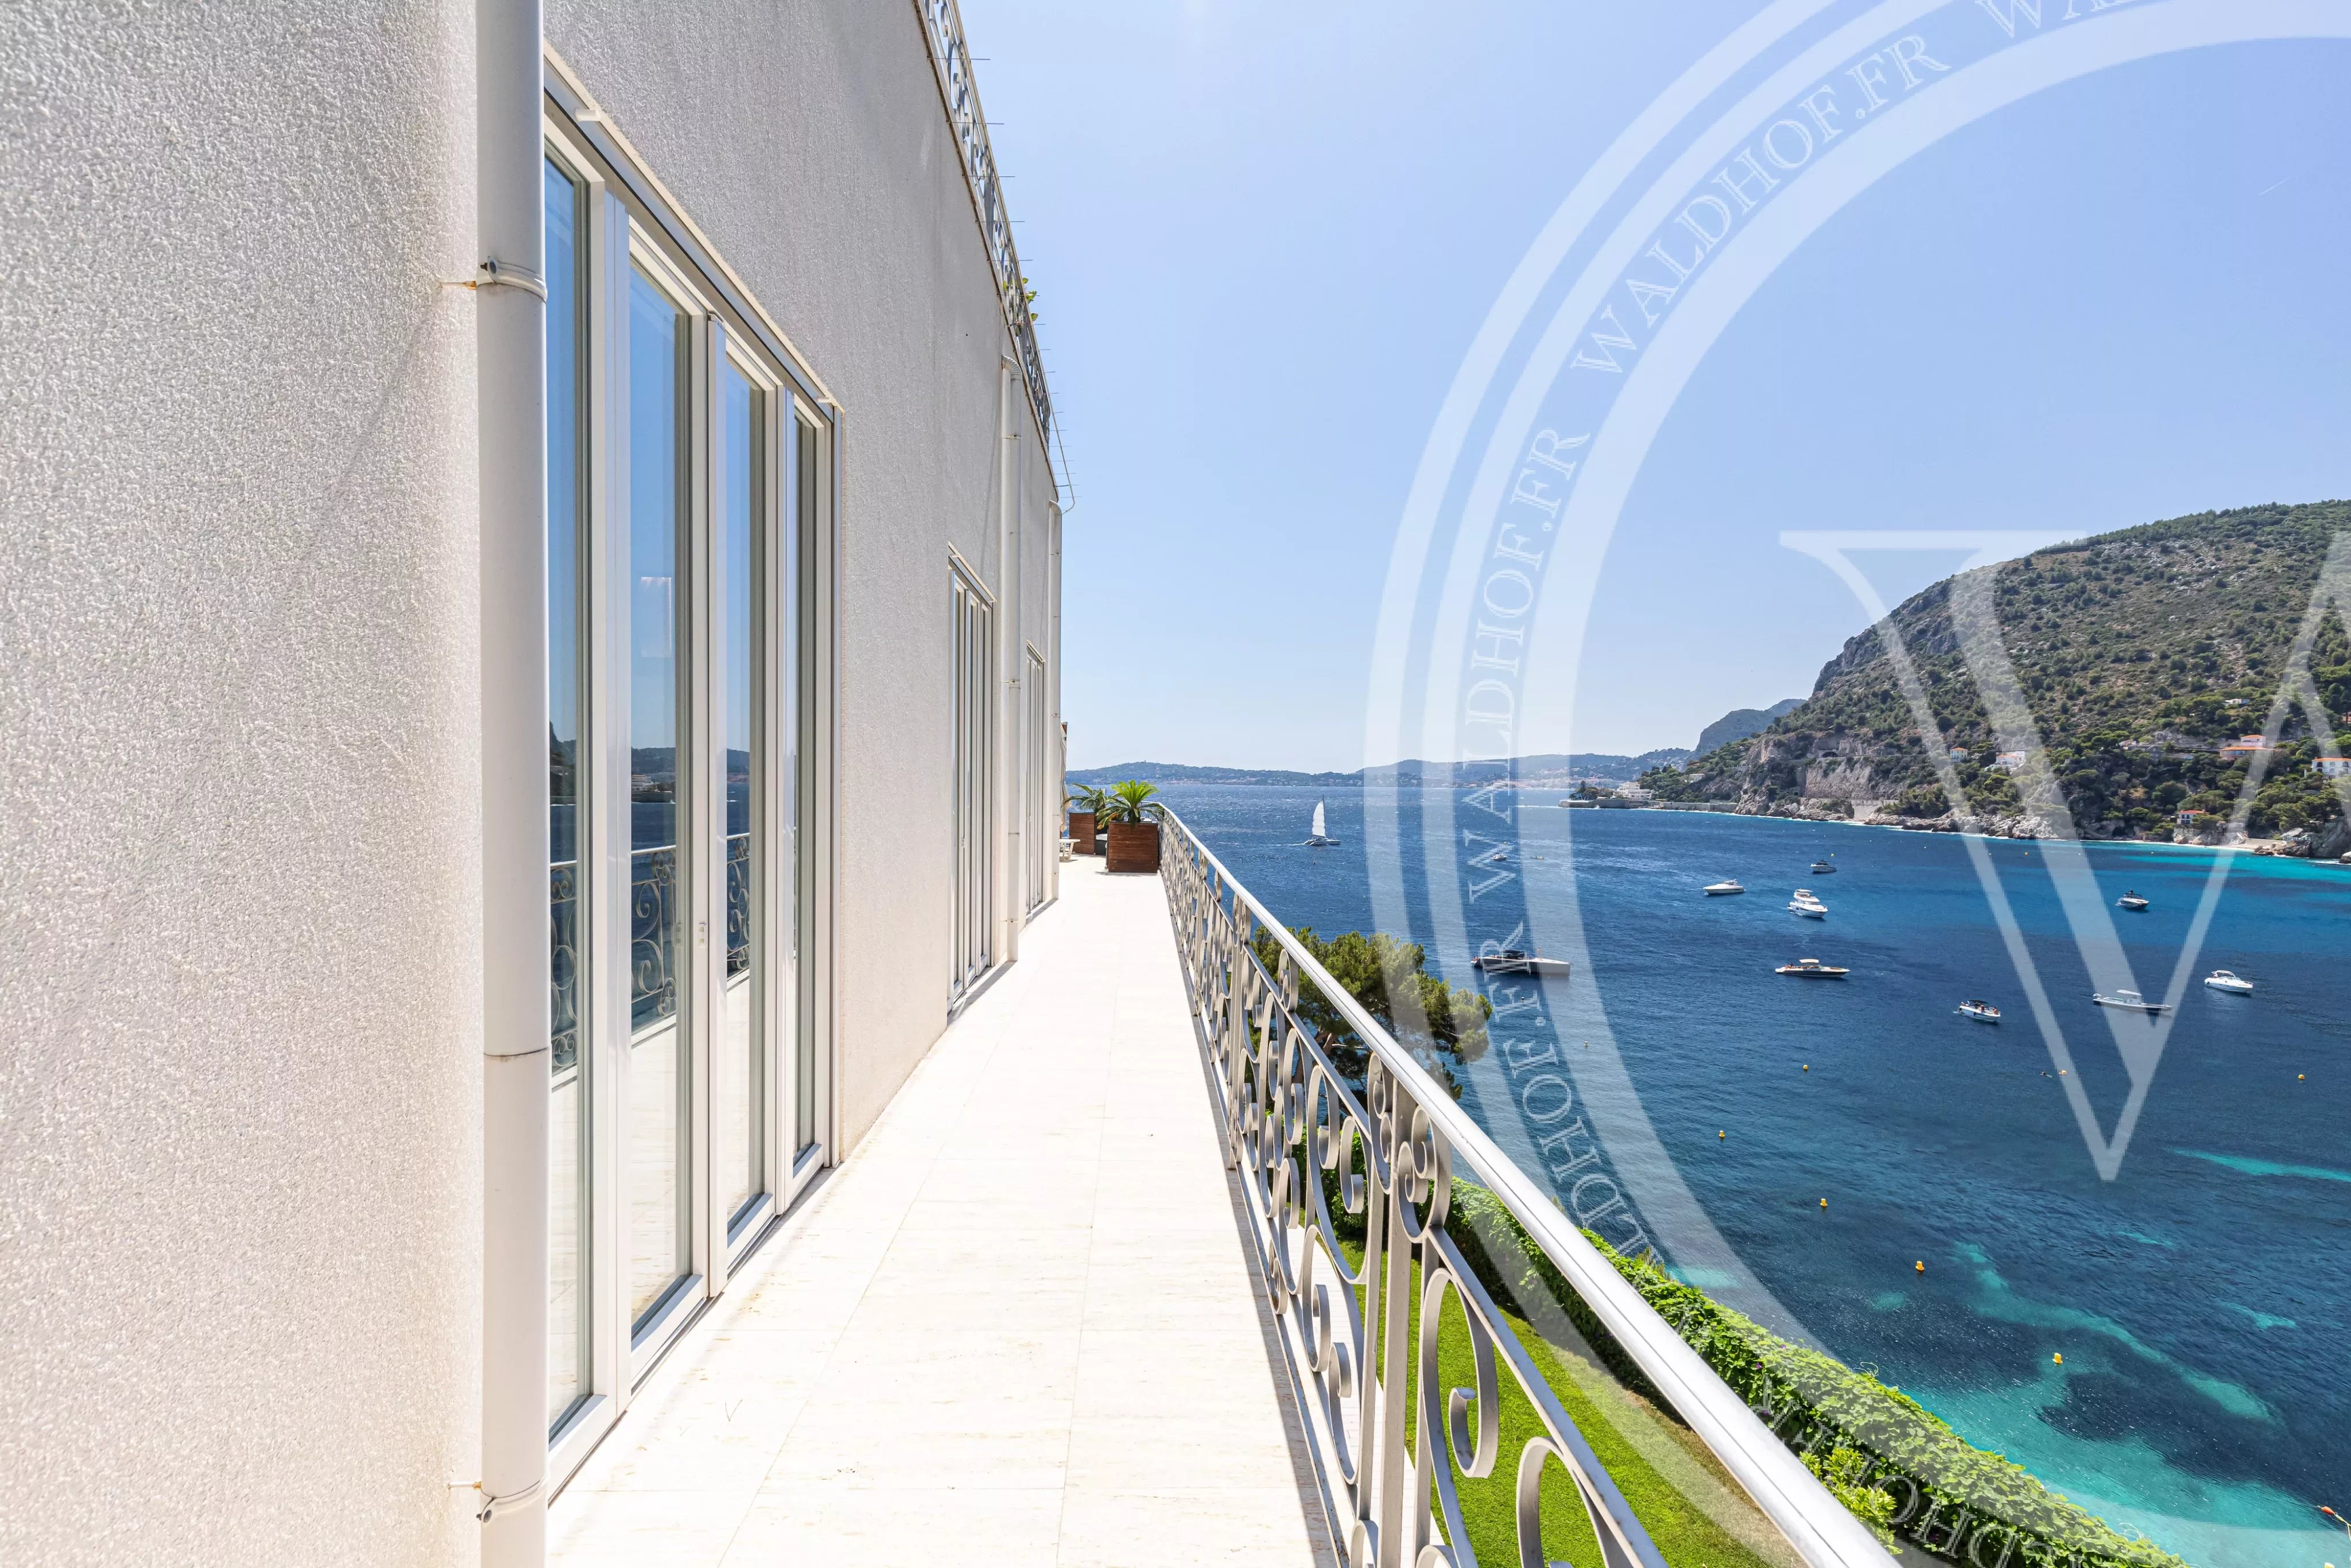 Waterfront property in Cap d'Ail with beach & dock access